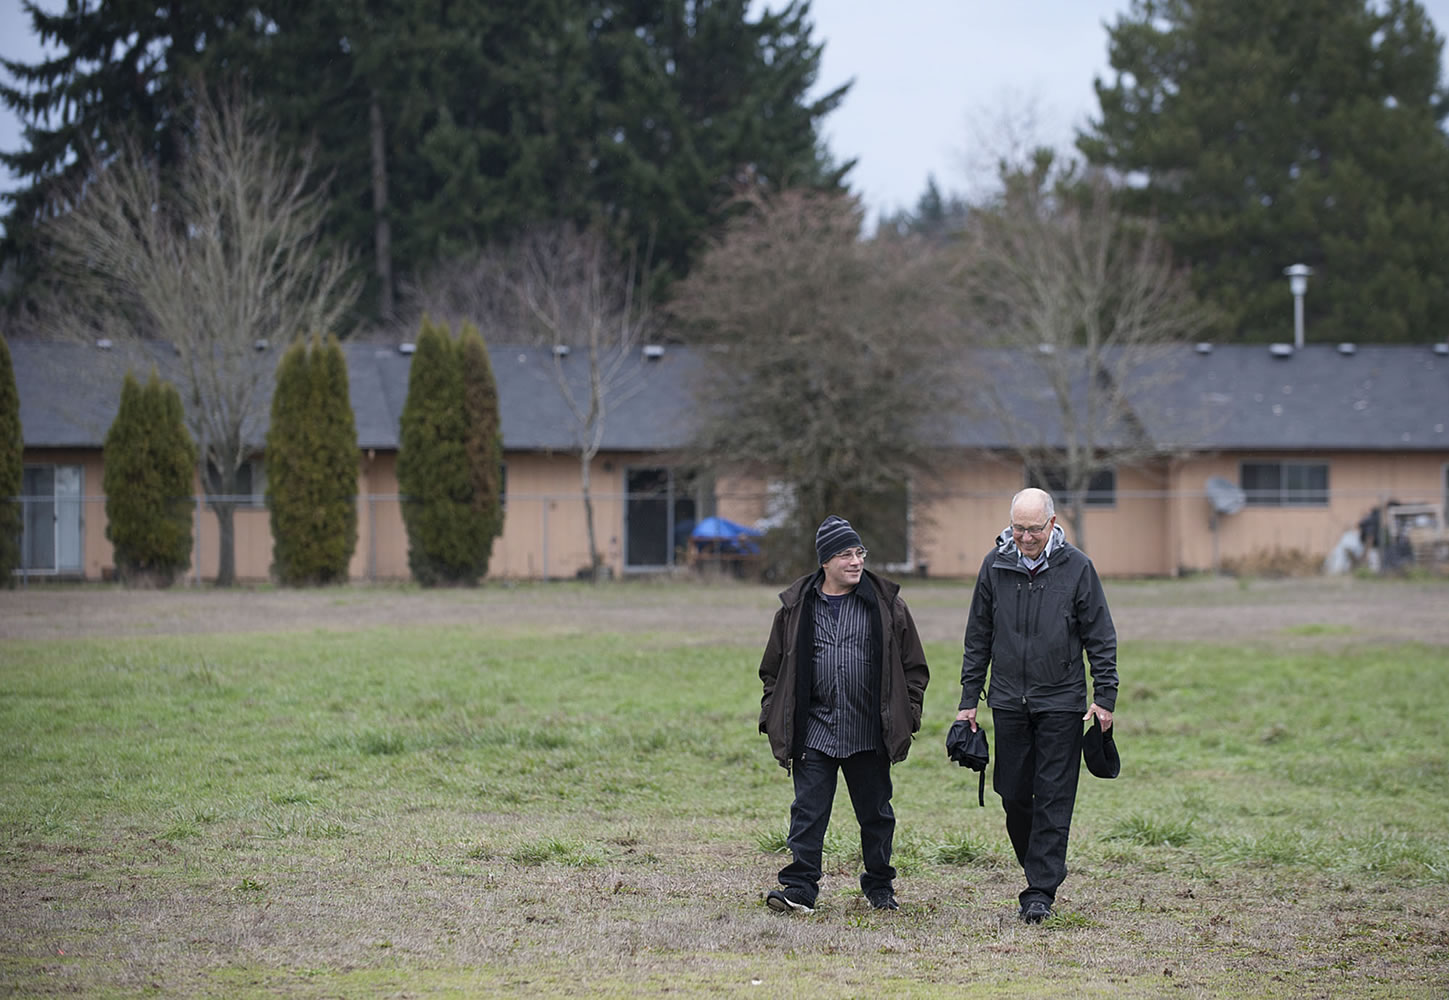 Adam Kravitz, left, founder of Outsiders Inn, strolls with Bill Ritchie of the Clark County Commission on Aging on Dec. 3 outside Safe Harbor Church of the Nazarene in Vancouver, where the Council for the Homeless had planned to build a village of 40 tiny houses for the homeless. Wednesday, the church backed out of the project, and organizers are looking for a new site.